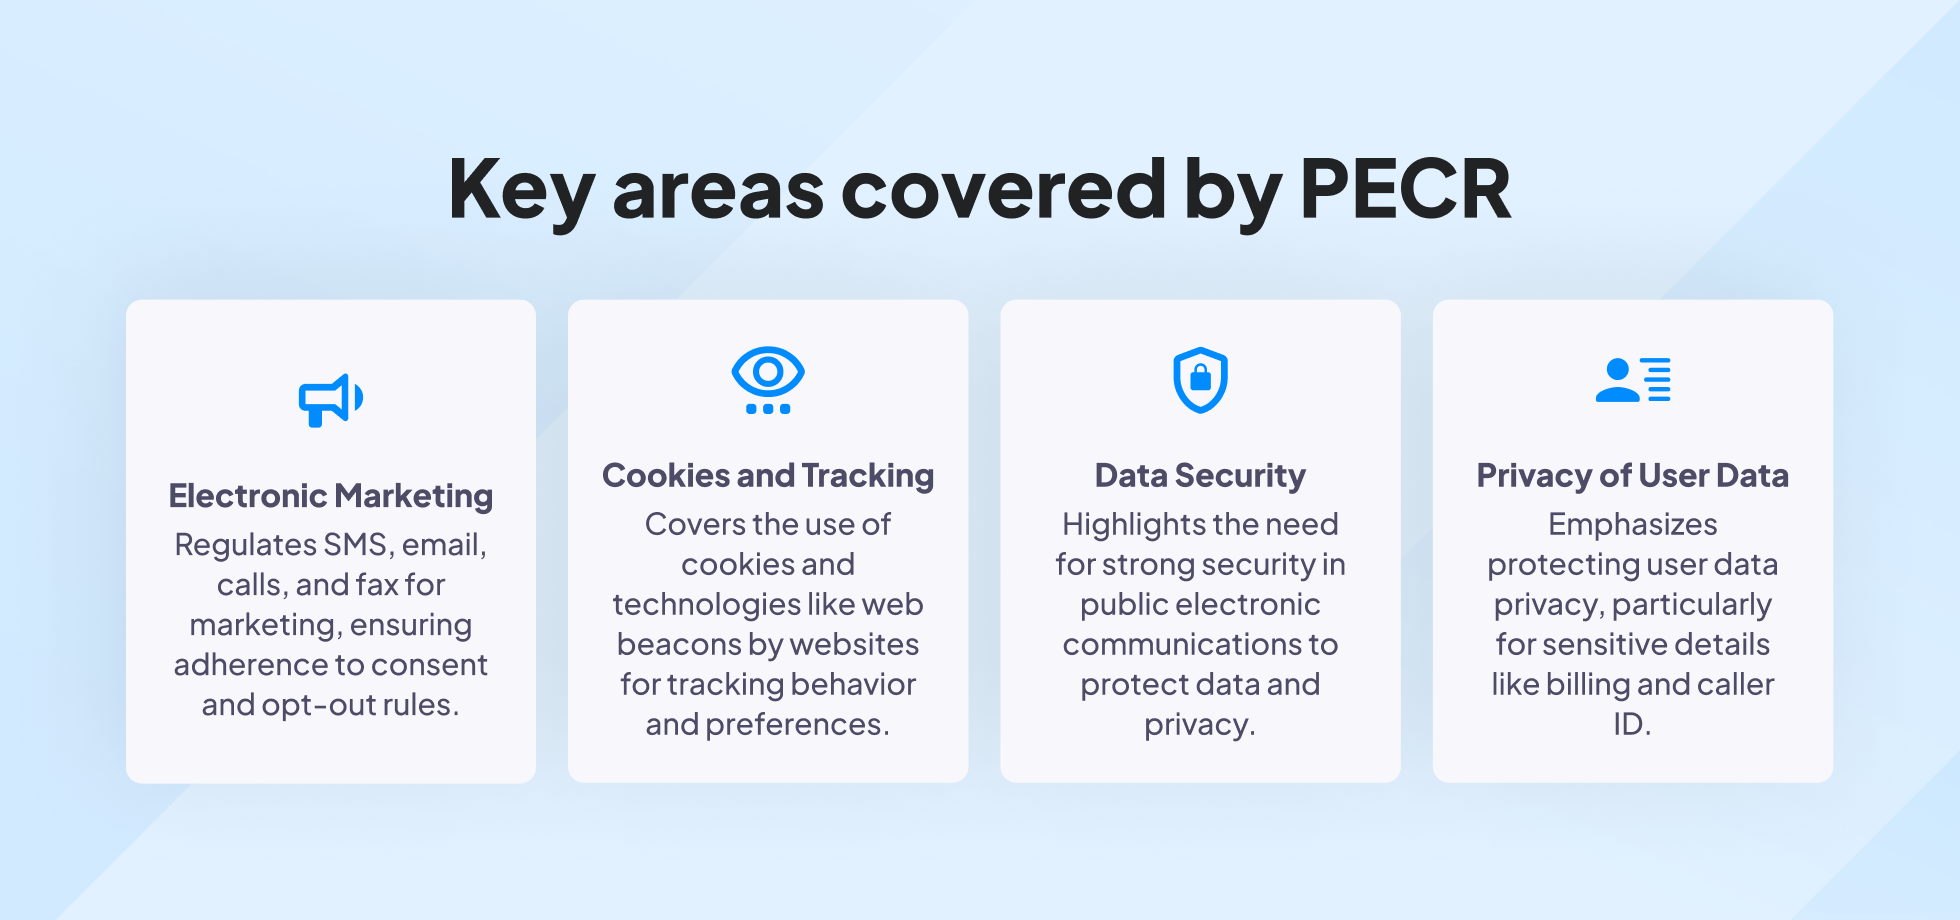 Key areas covered by PECR